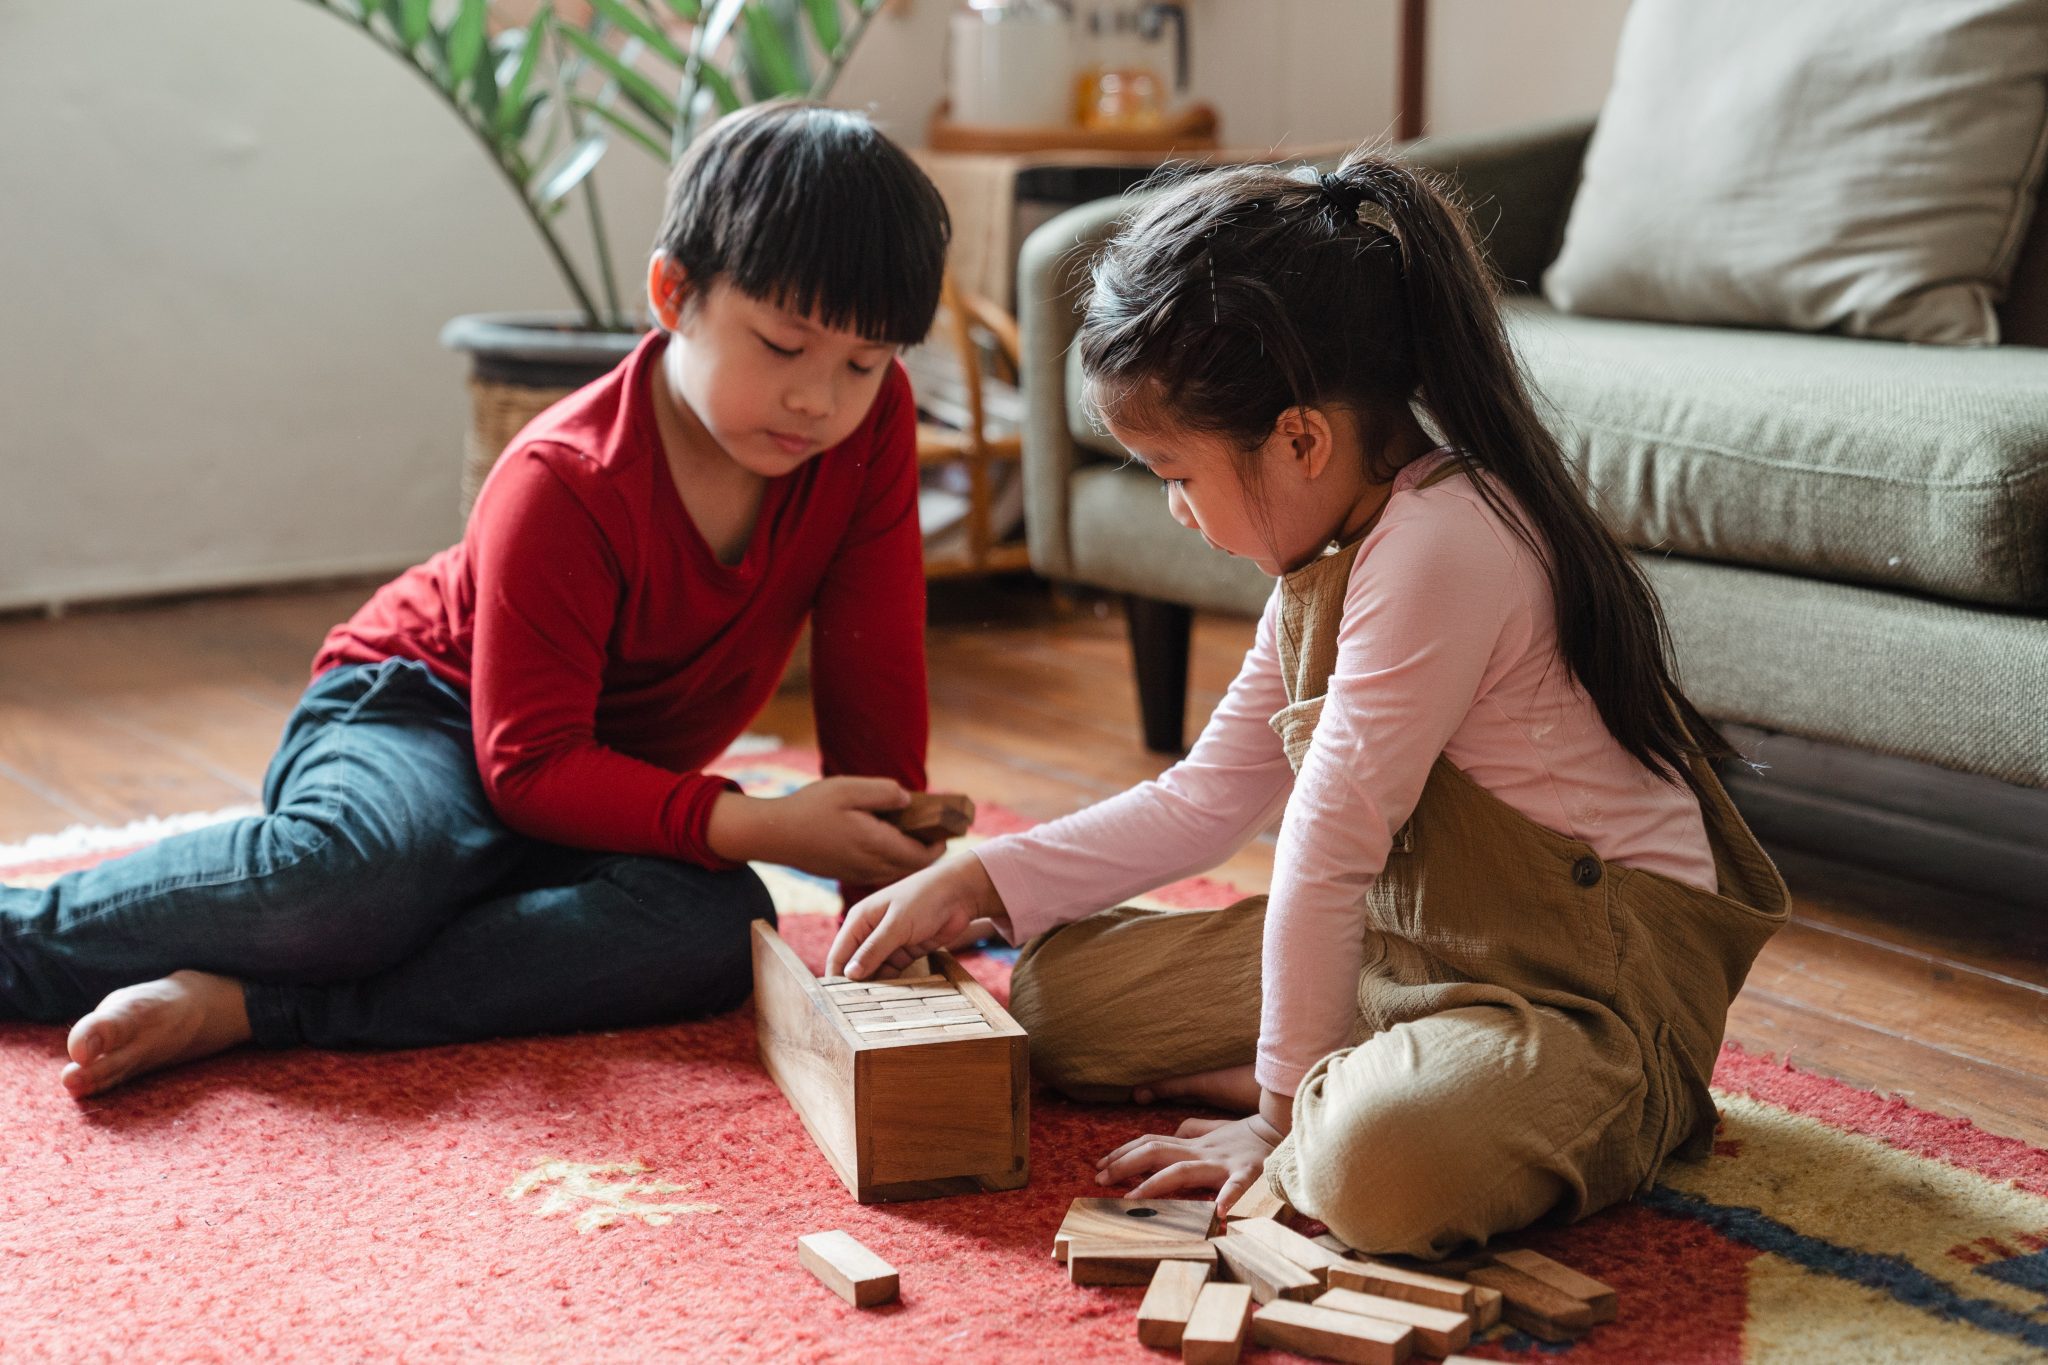 Kids Playing With Wooden Blocks